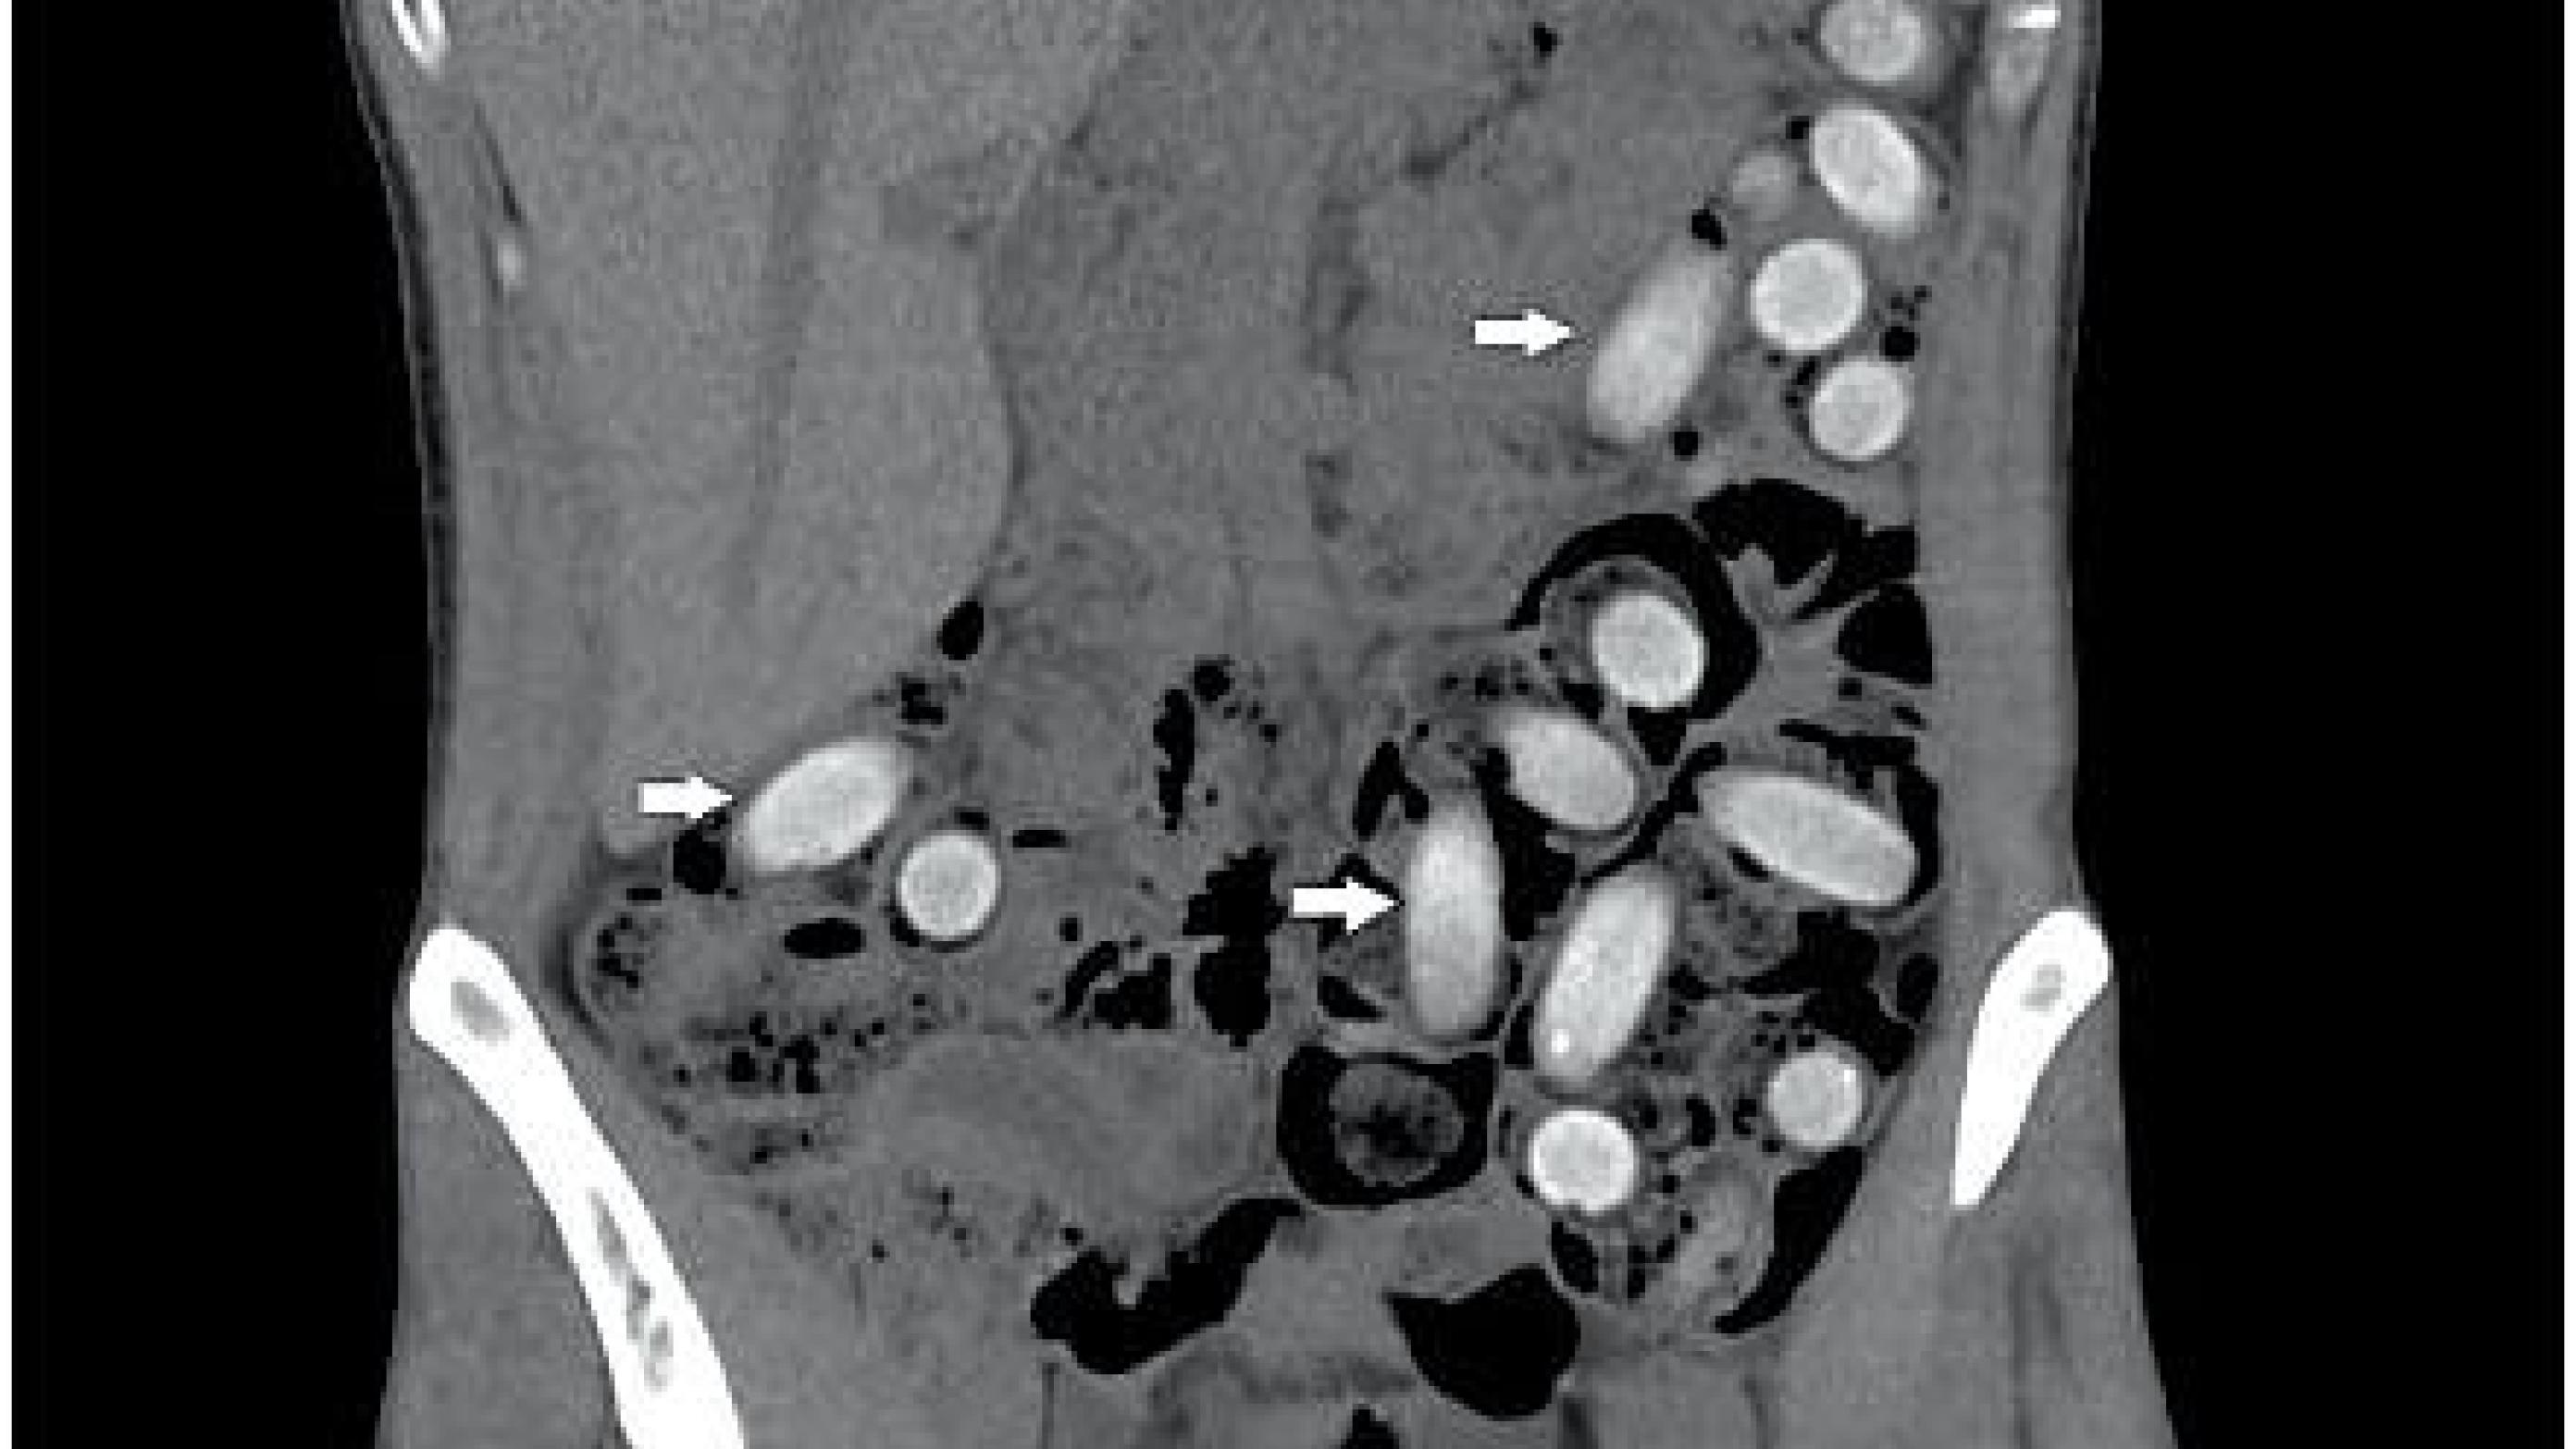 A CT showing multiple intra-abdominal foreign bodies (arrows) in a male body packer.